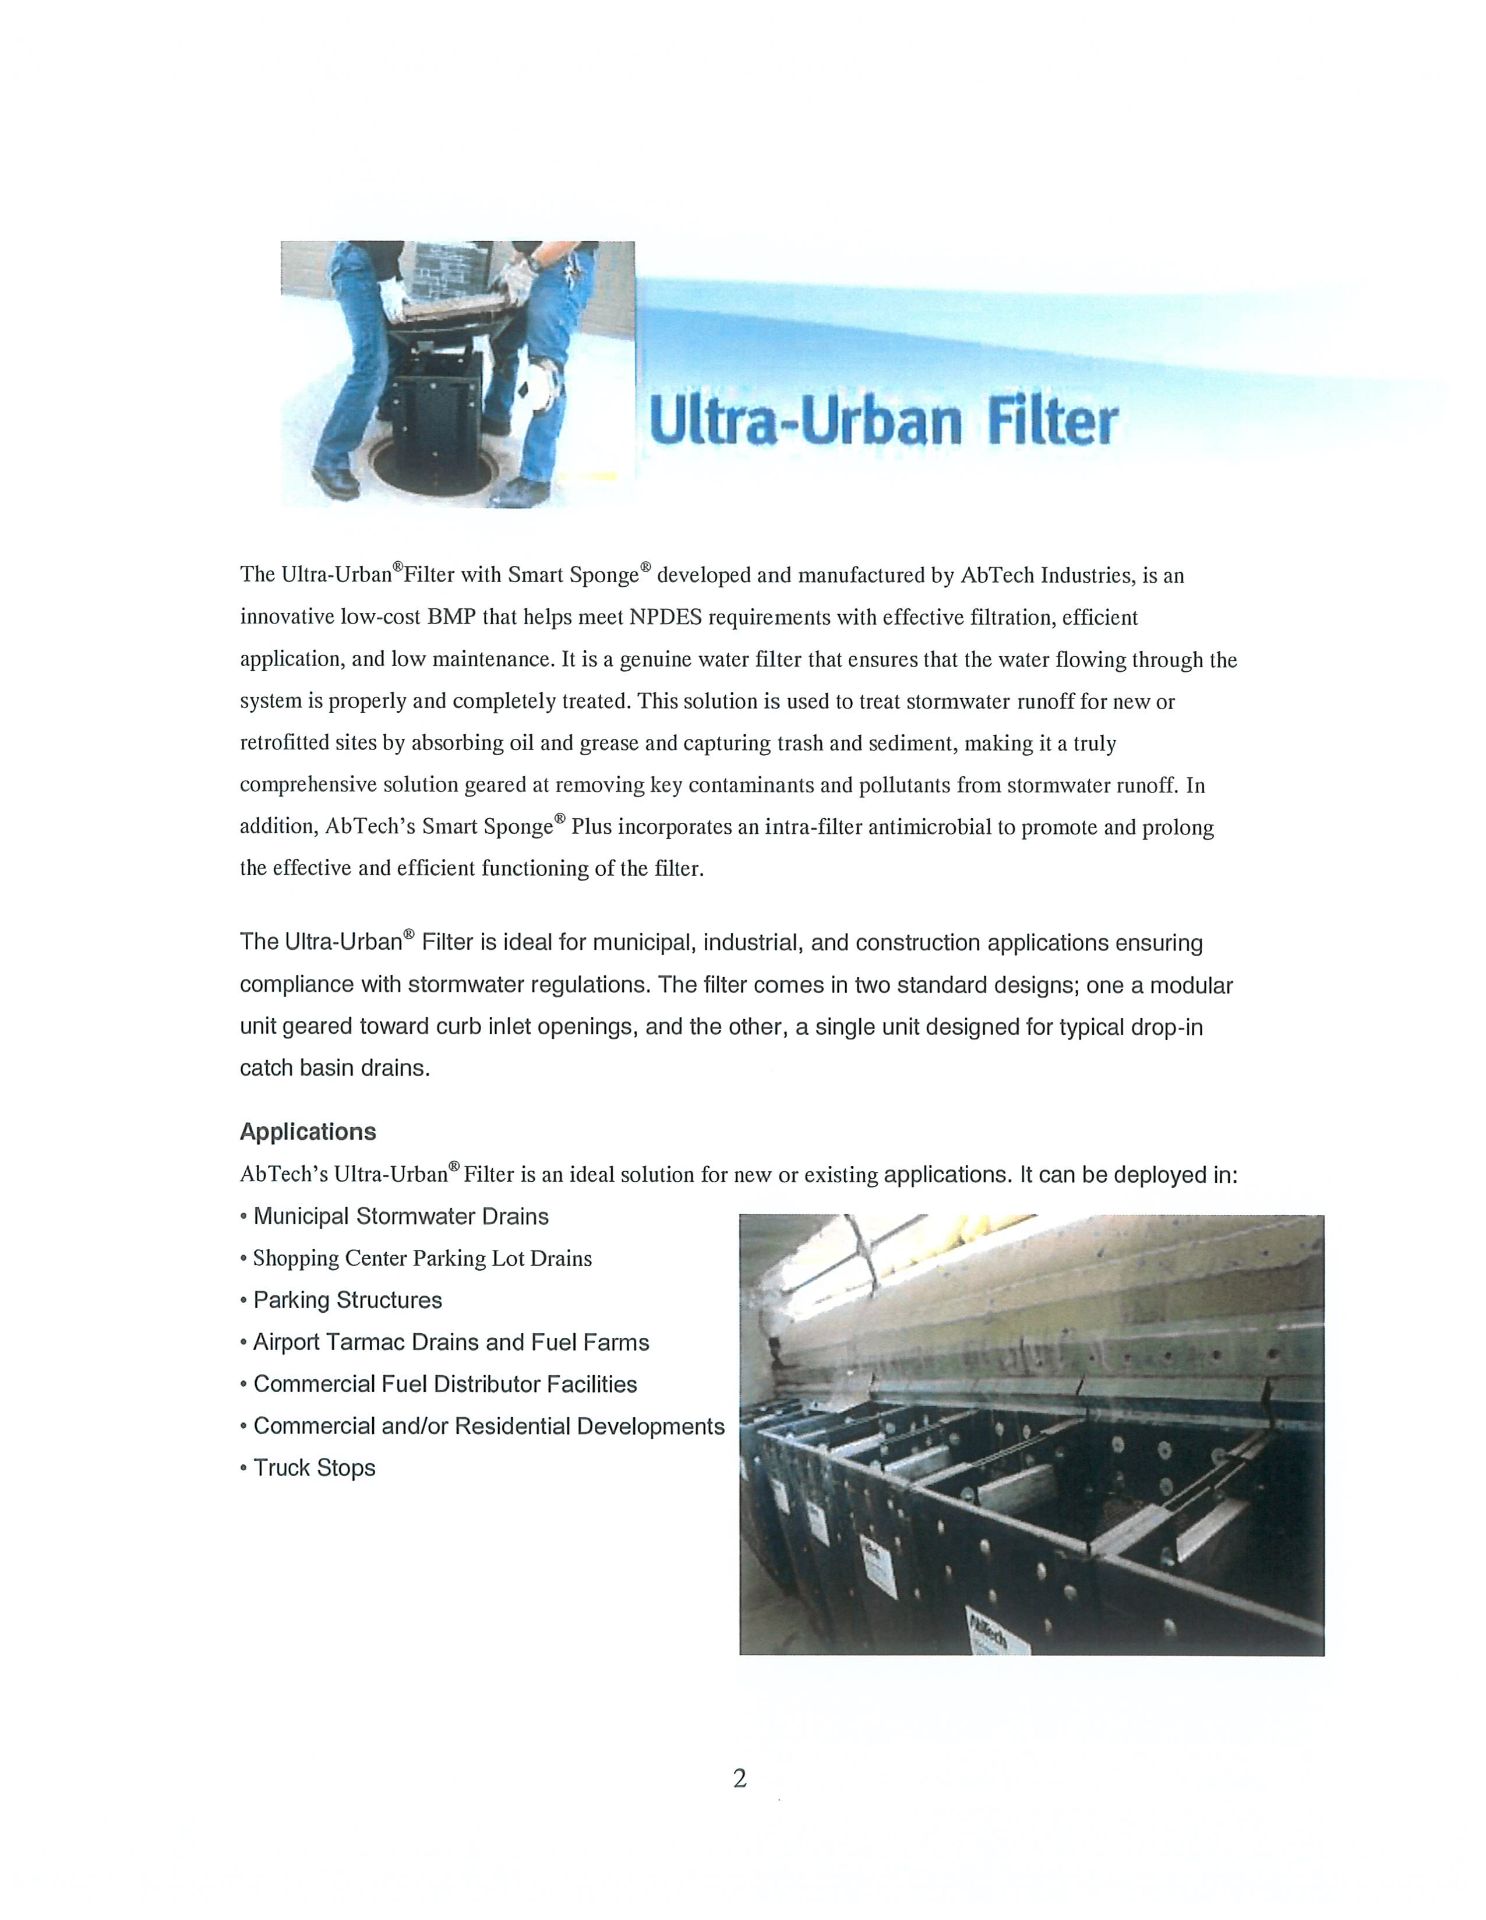 THE ULTRA-URBAN® FILTER WITH SMART SPONGE® BY ABTECH INDUSTRIES - Image 10 of 26